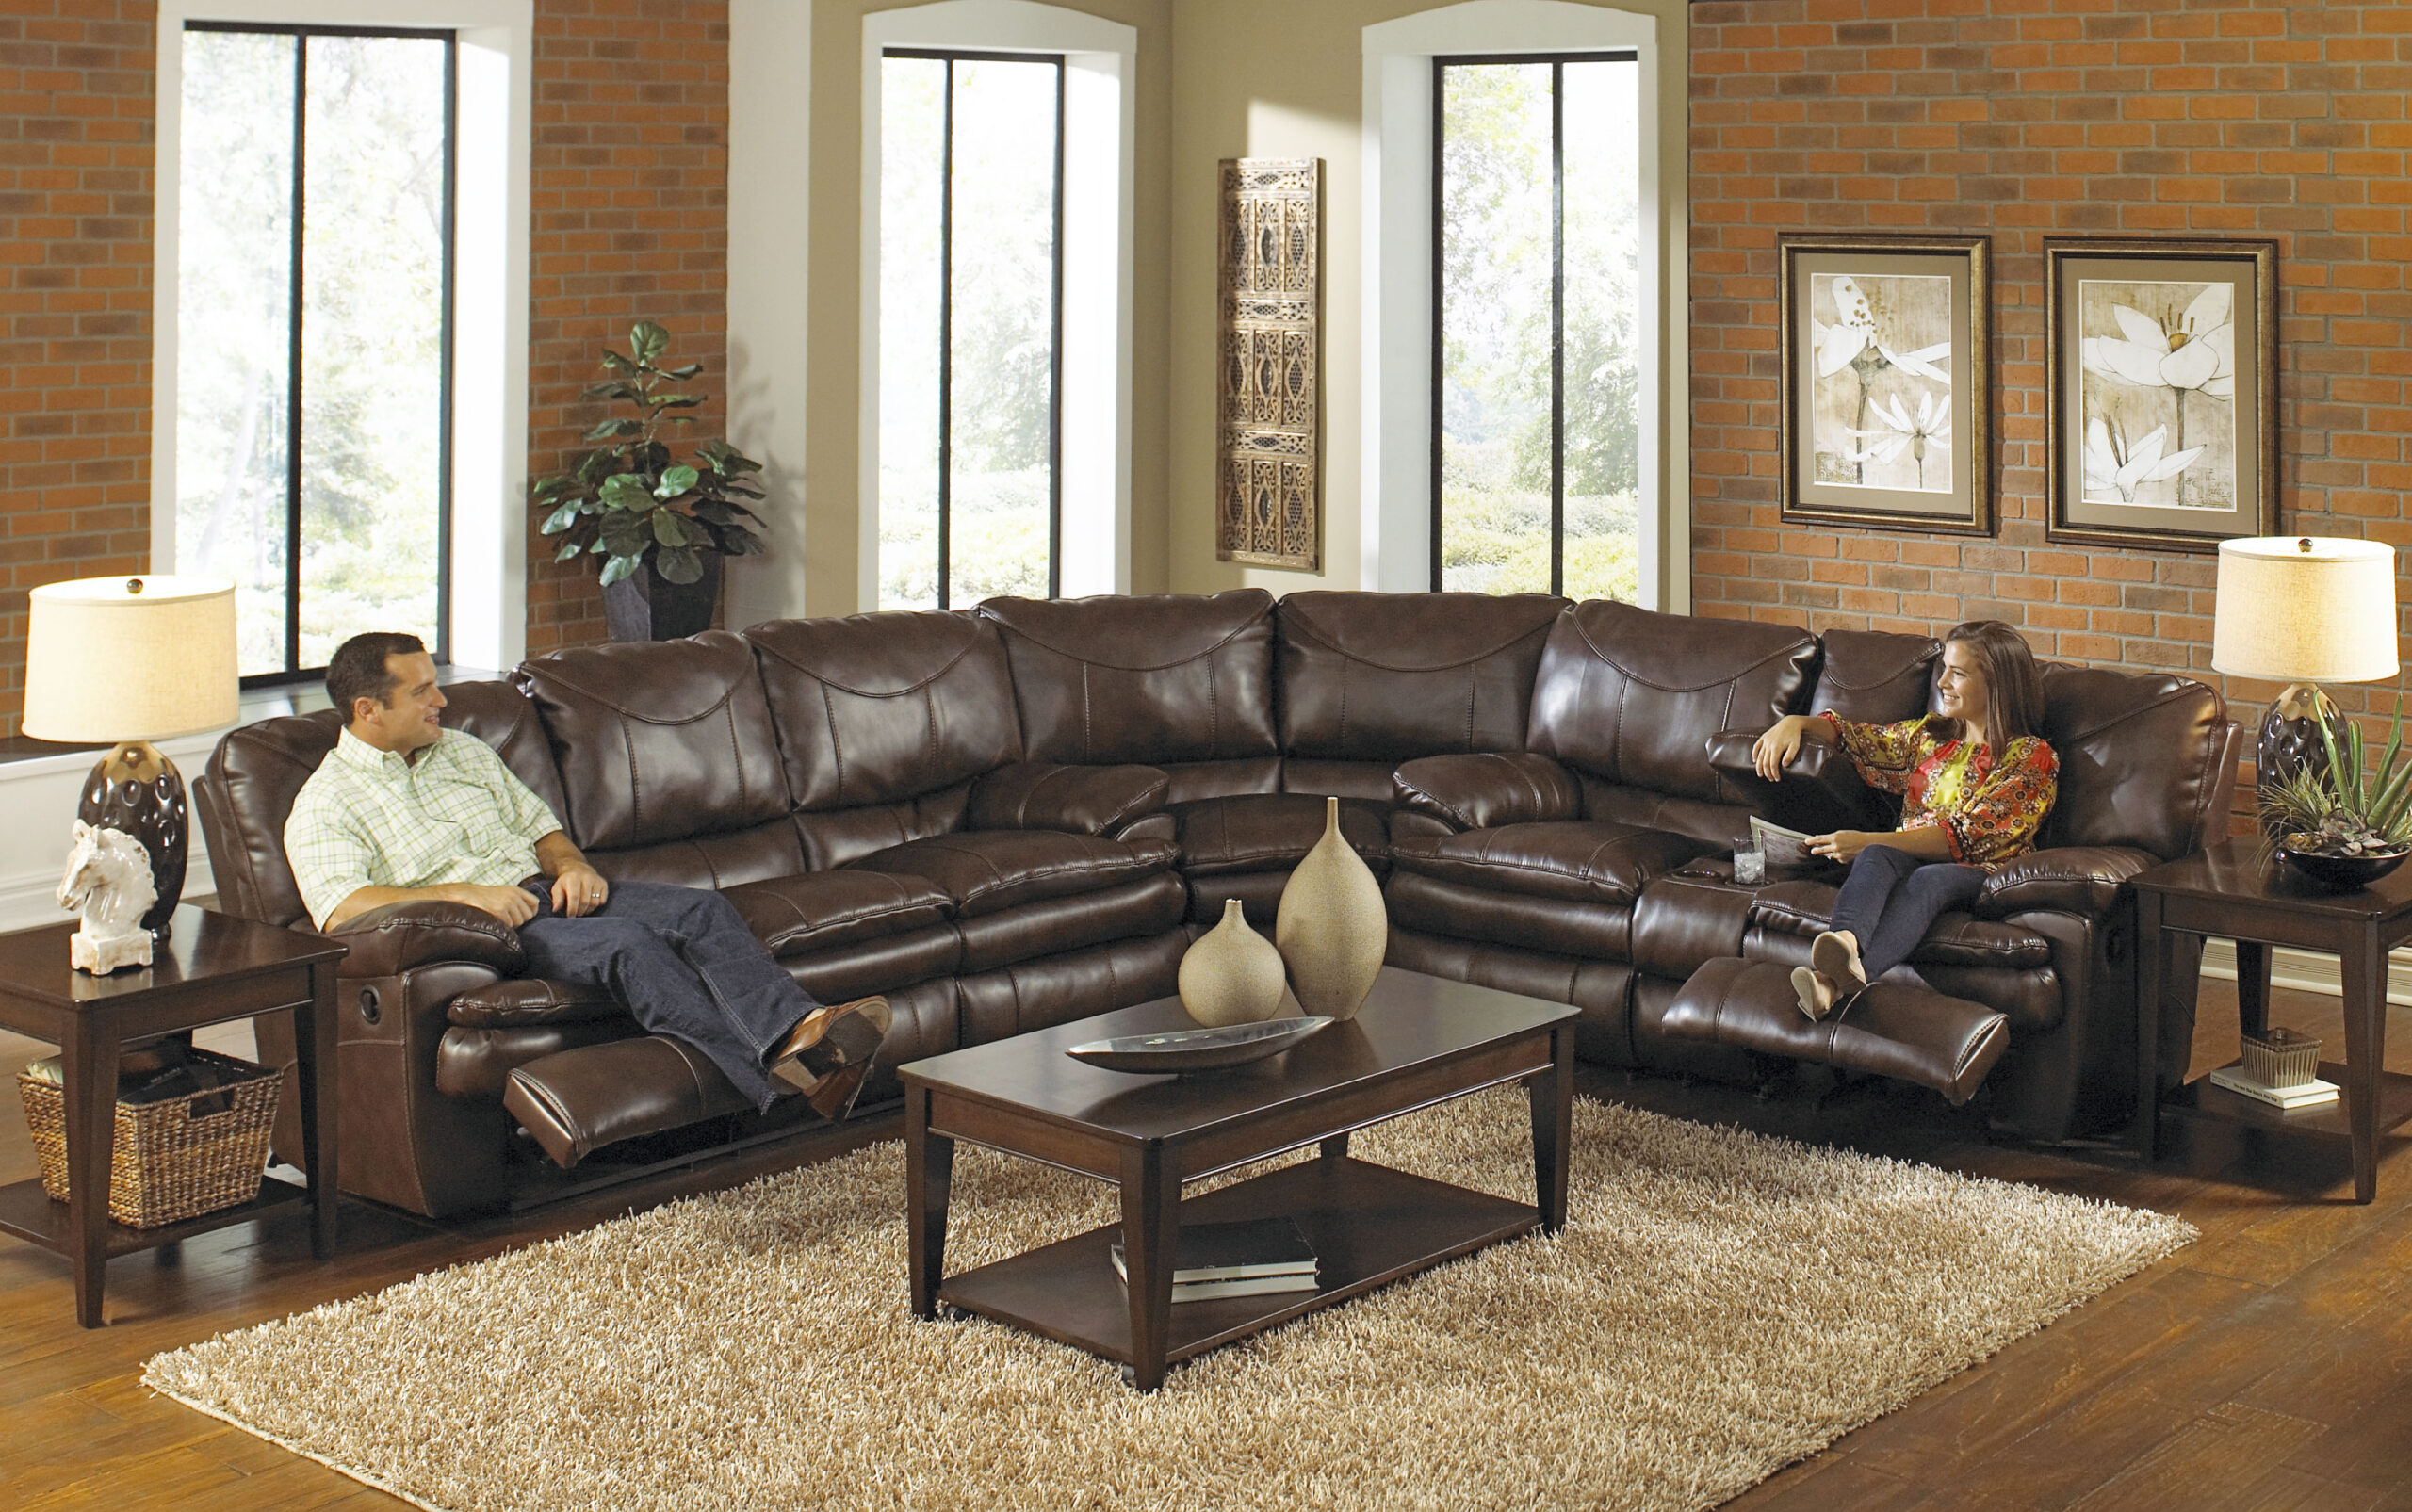 sectional reclining sofa ... an overview of sectional sofas with recliner elites home decor intended RAYQFBU